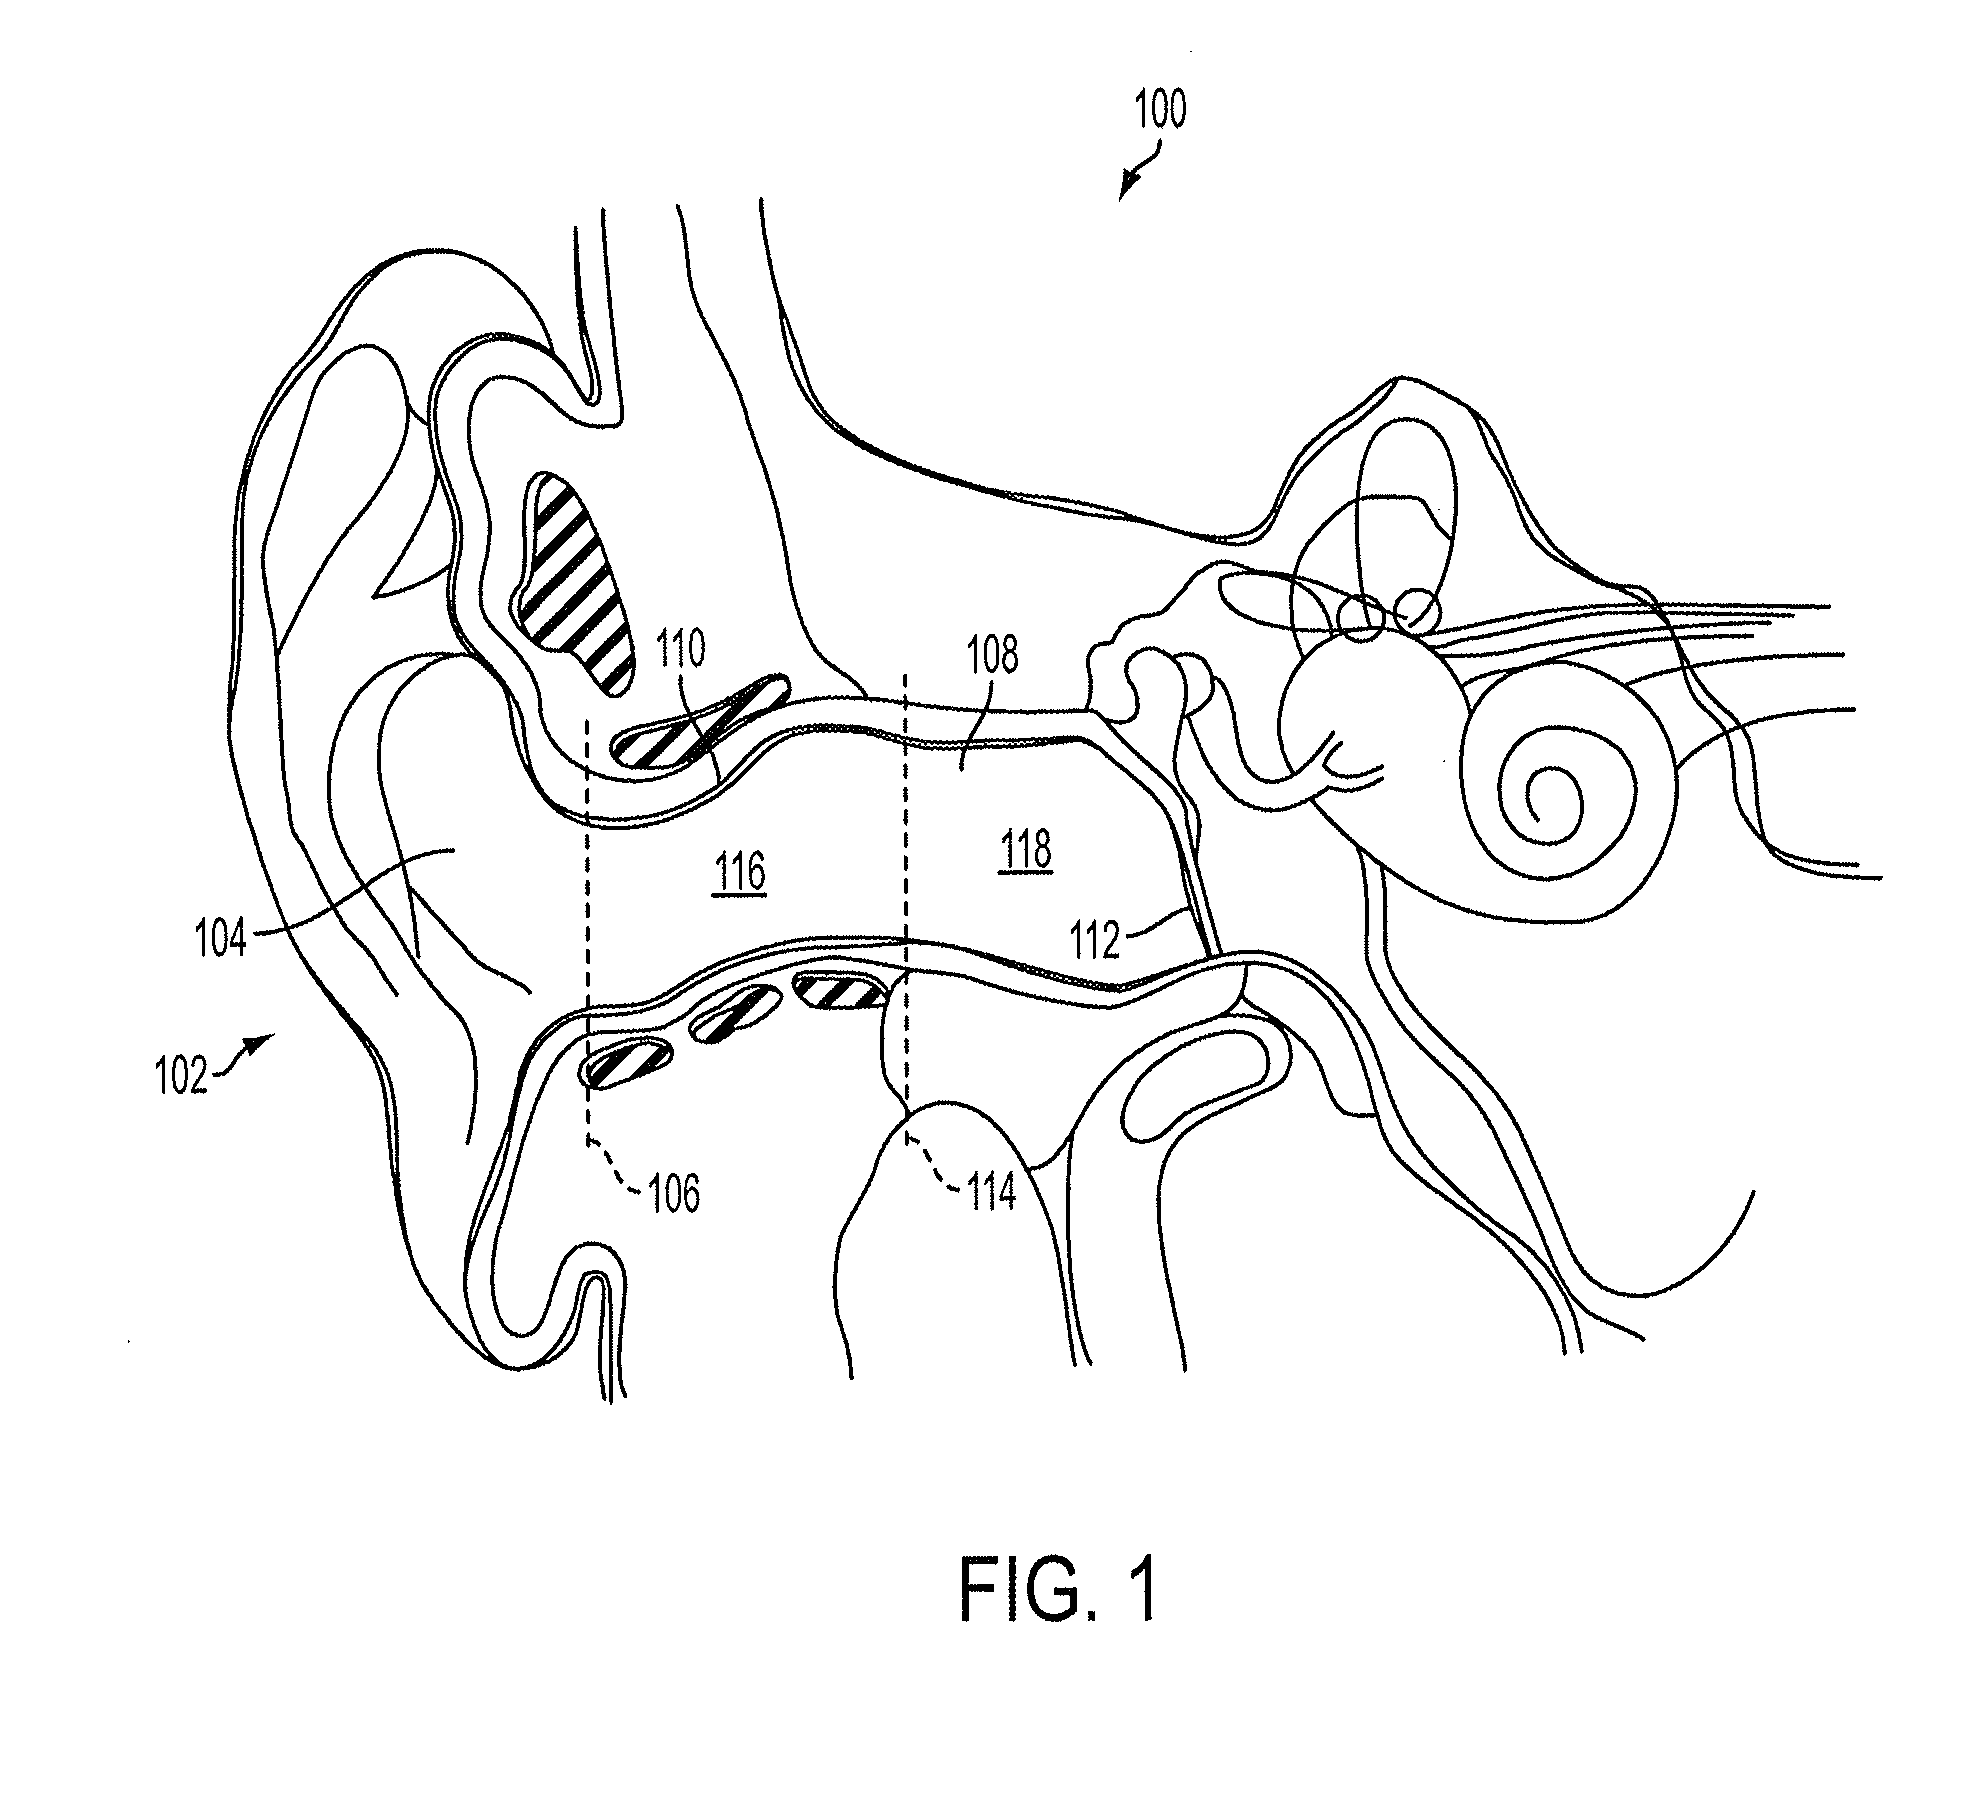 Methods and devices for occluding an ear canal having a predetermined filter characteristic